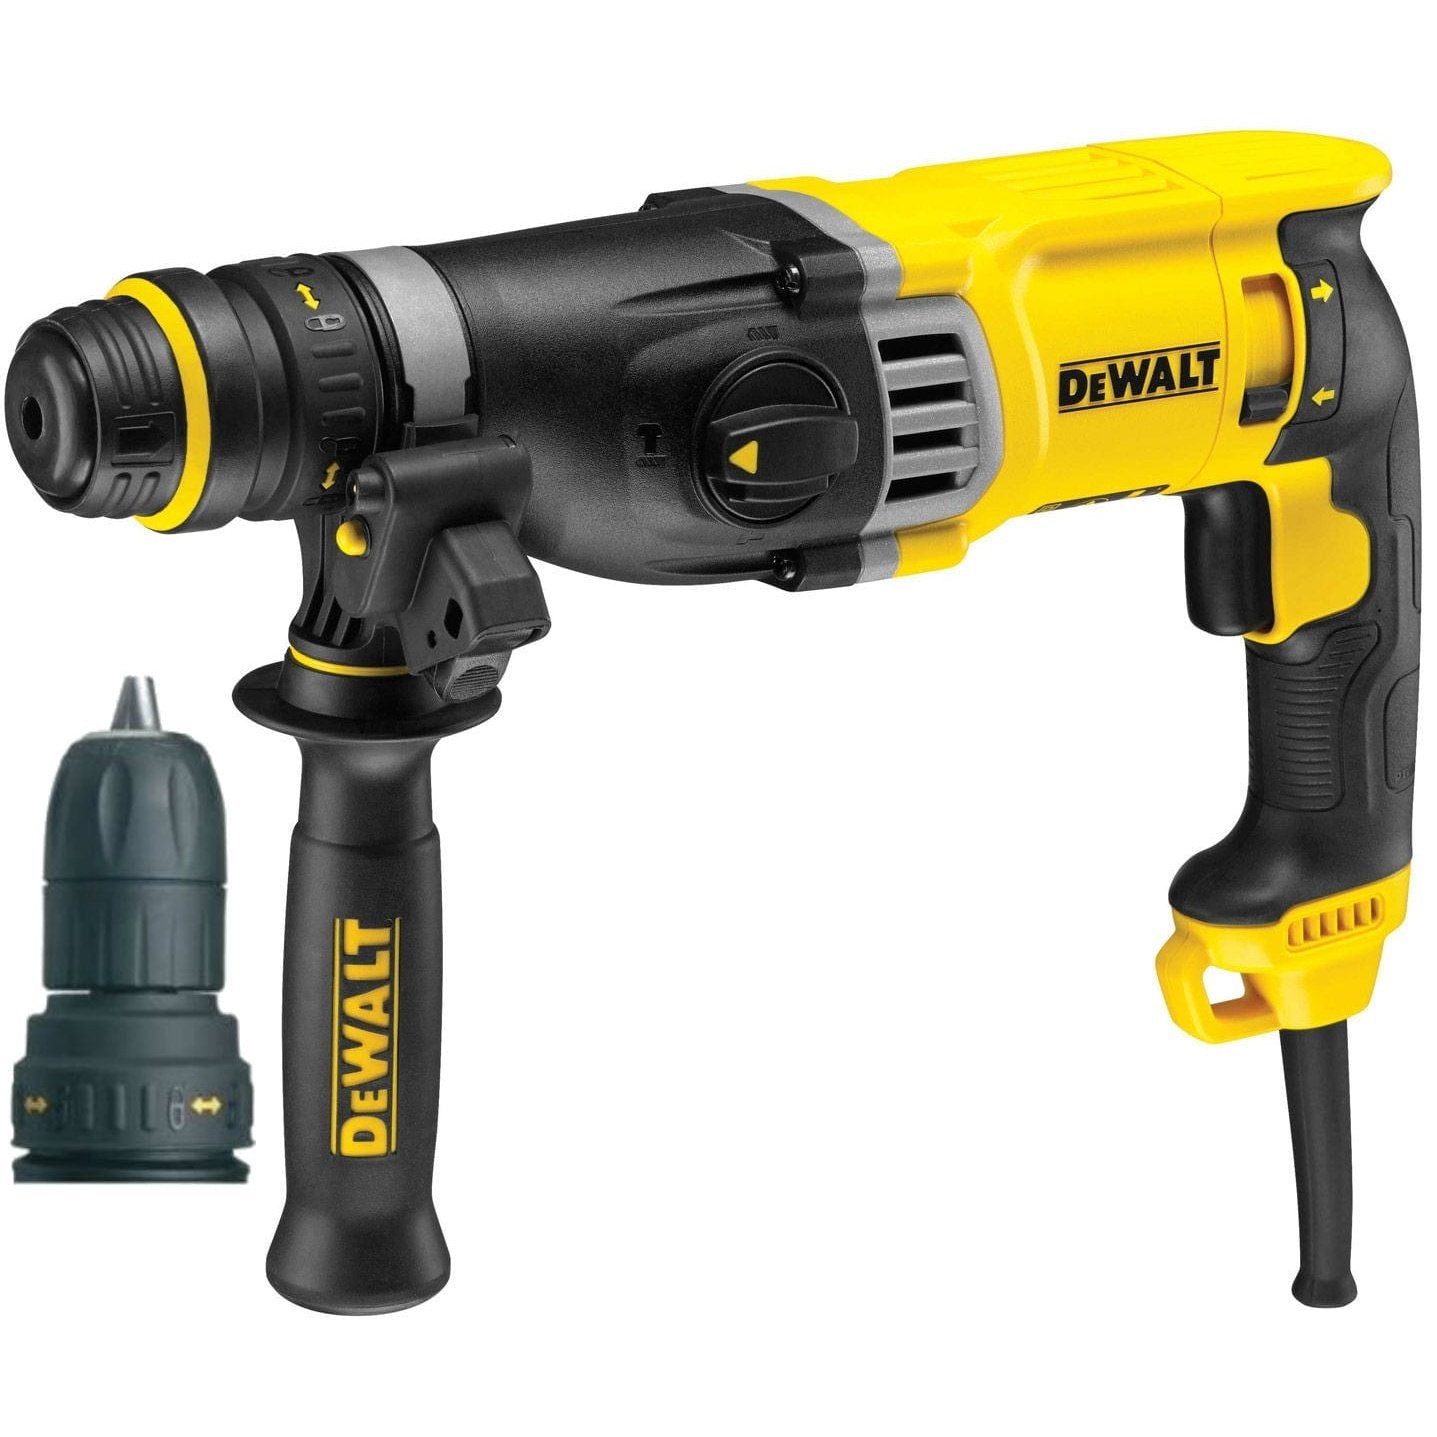 Buy DeWalt 28mm SDS Plus Rotary Hammer Drill With QCC 900W - D25144K-B5 in Accra, Ghana | Supply Master Drill Buy Tools hardware Building materials